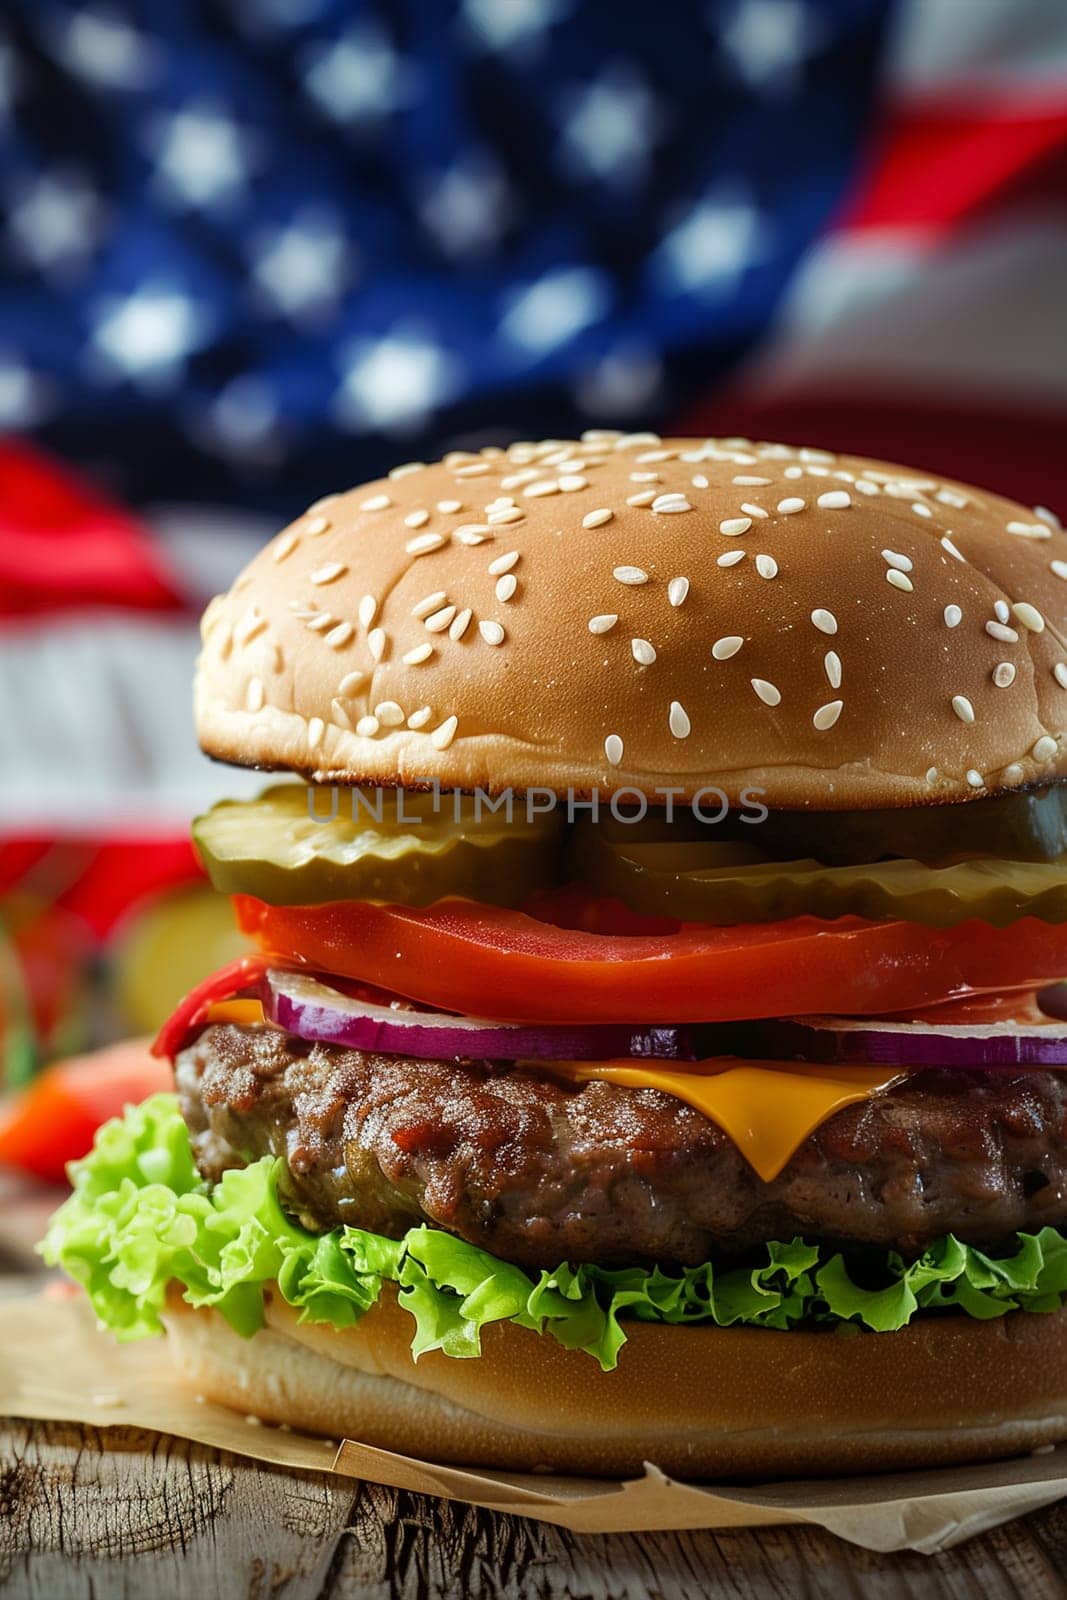 A hamburger is placed on top of a wooden table, showcasing a classic fast food meal ready to be enjoyed.